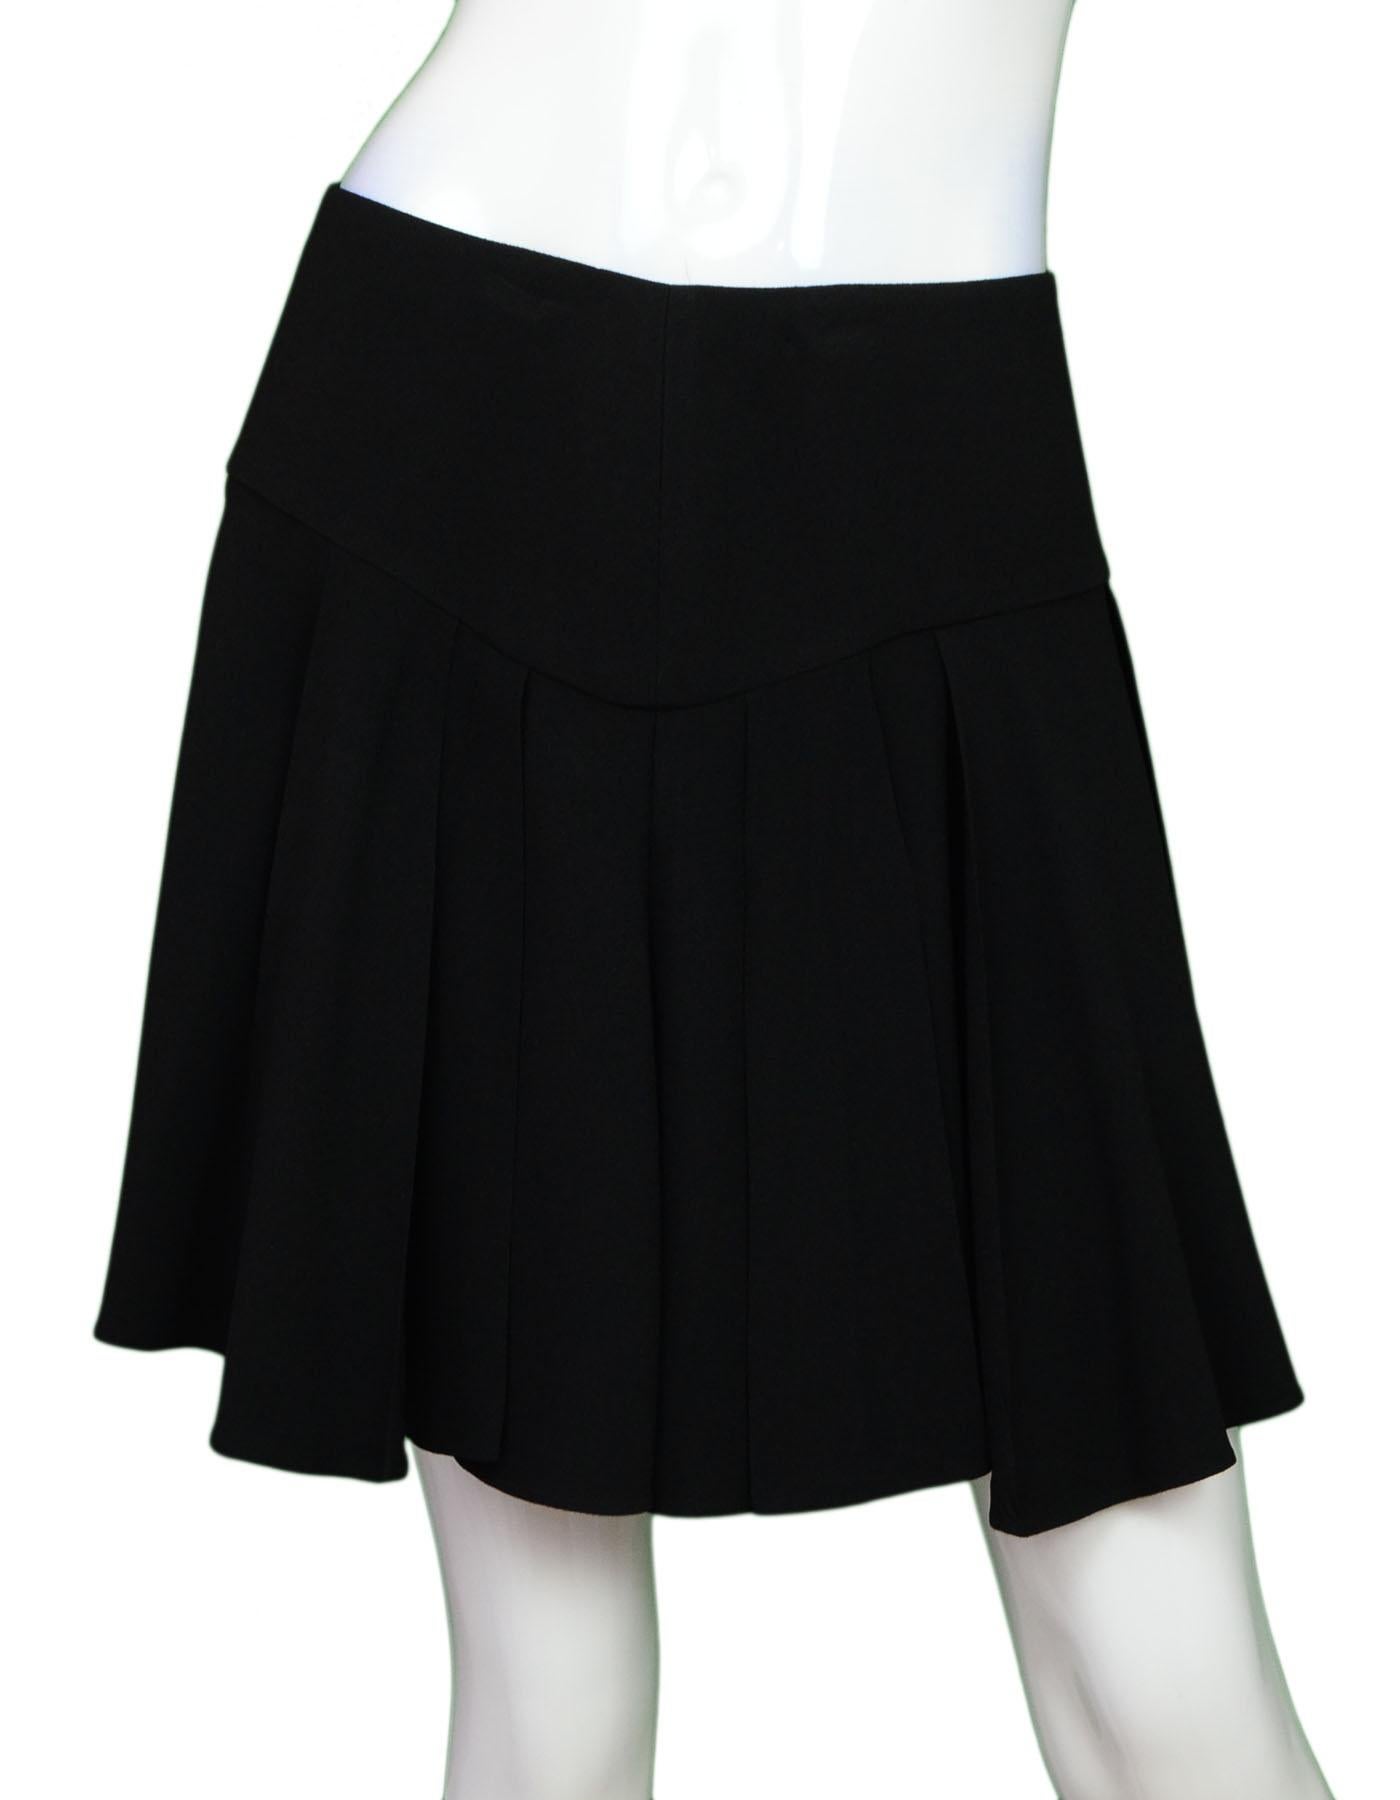 Saint Laurent Black Pleated Mini Skirt

Made In: Italy
Color: Black
Composition: 57% acetate, 43% viscose
Lining: None
Closure/Opening: Side zip closure
Overall Condition: Excellen pre-owned condition

Marked Size: Not listed - please refer to